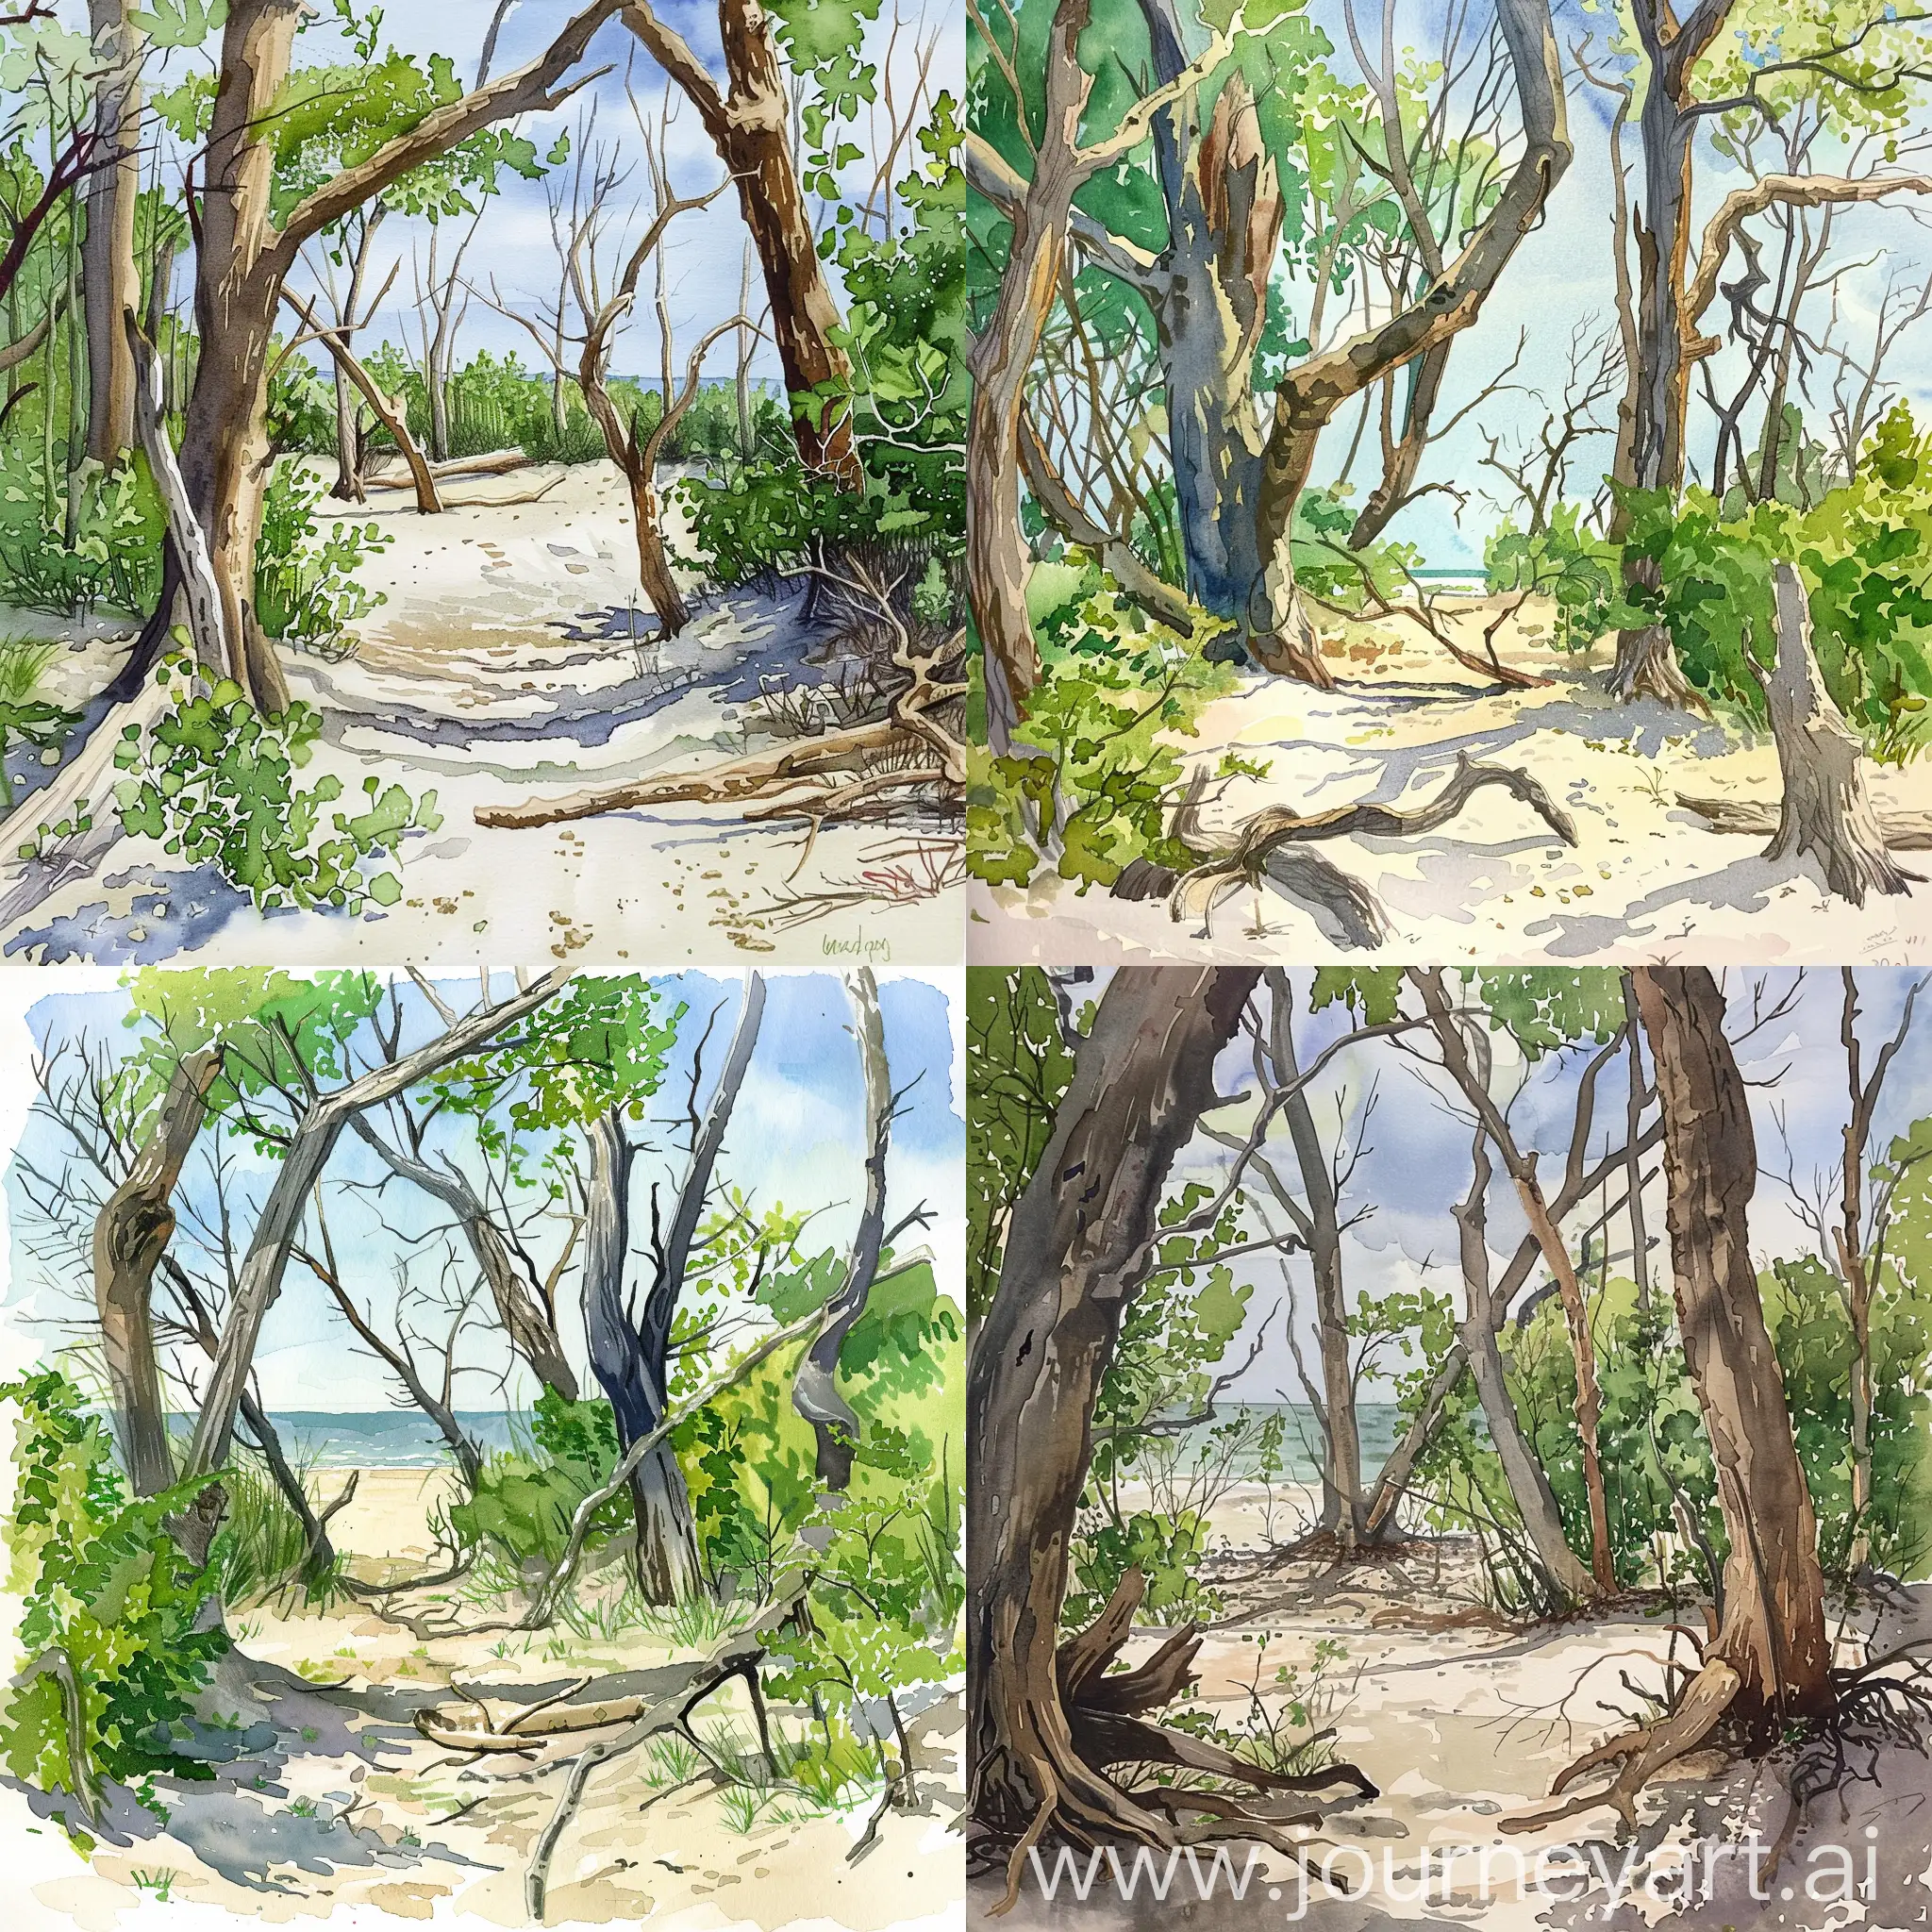 Watercolor-Painting-of-a-Tranquil-Sandy-Beach-with-Early-Spring-Foliage-and-Dead-Trees